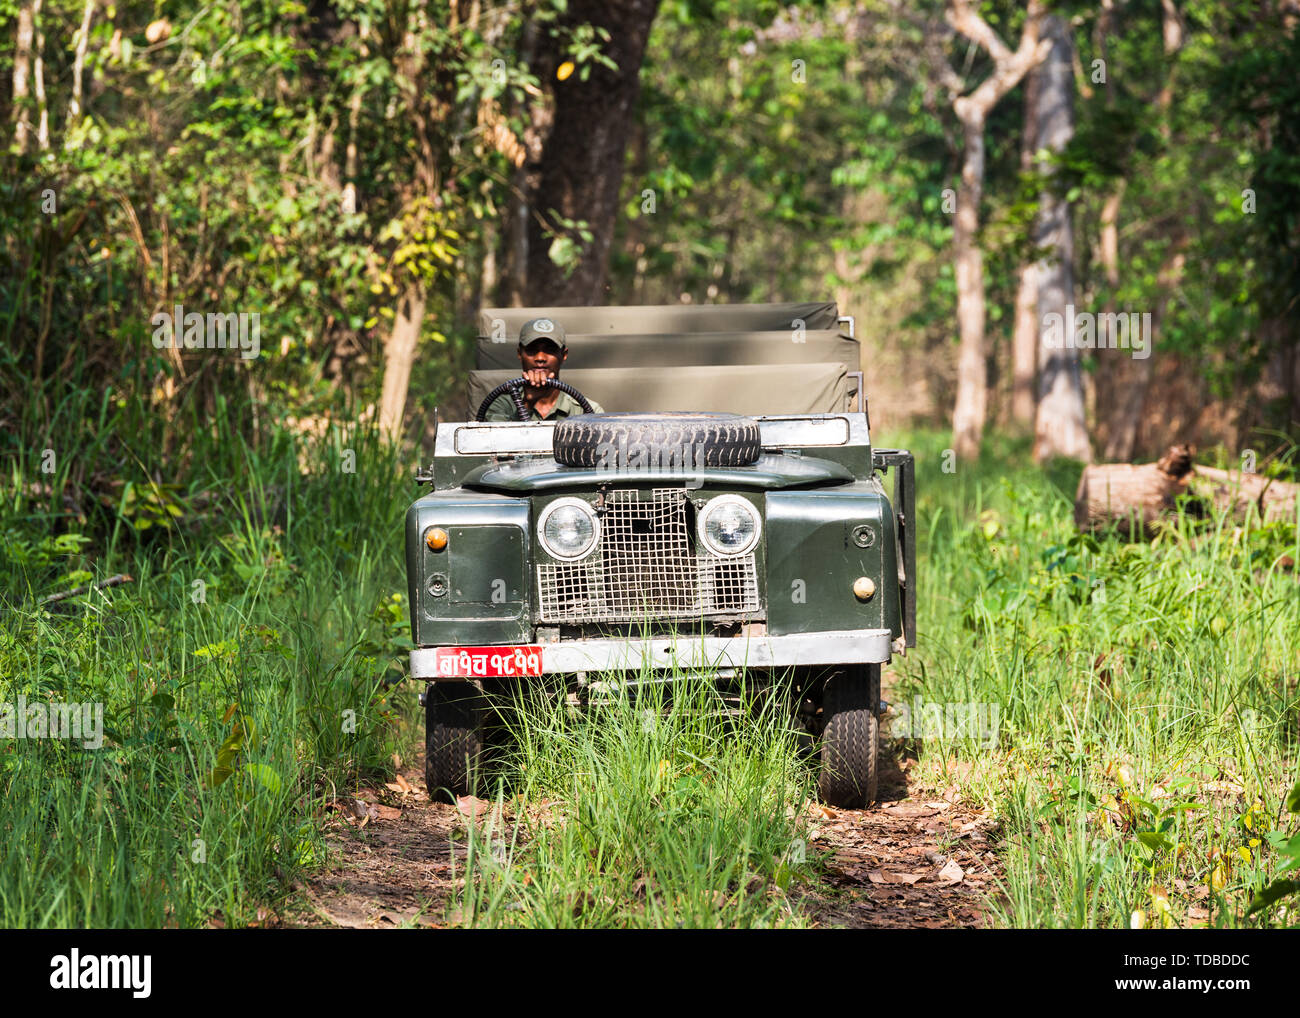 CHITWAN NATIONAL PARK, NEPAL - CIRCA MAY2019: A vintage Land Rover Series II is being driven in Chitwan National Park jungle. The car has been modifie Stock Photo